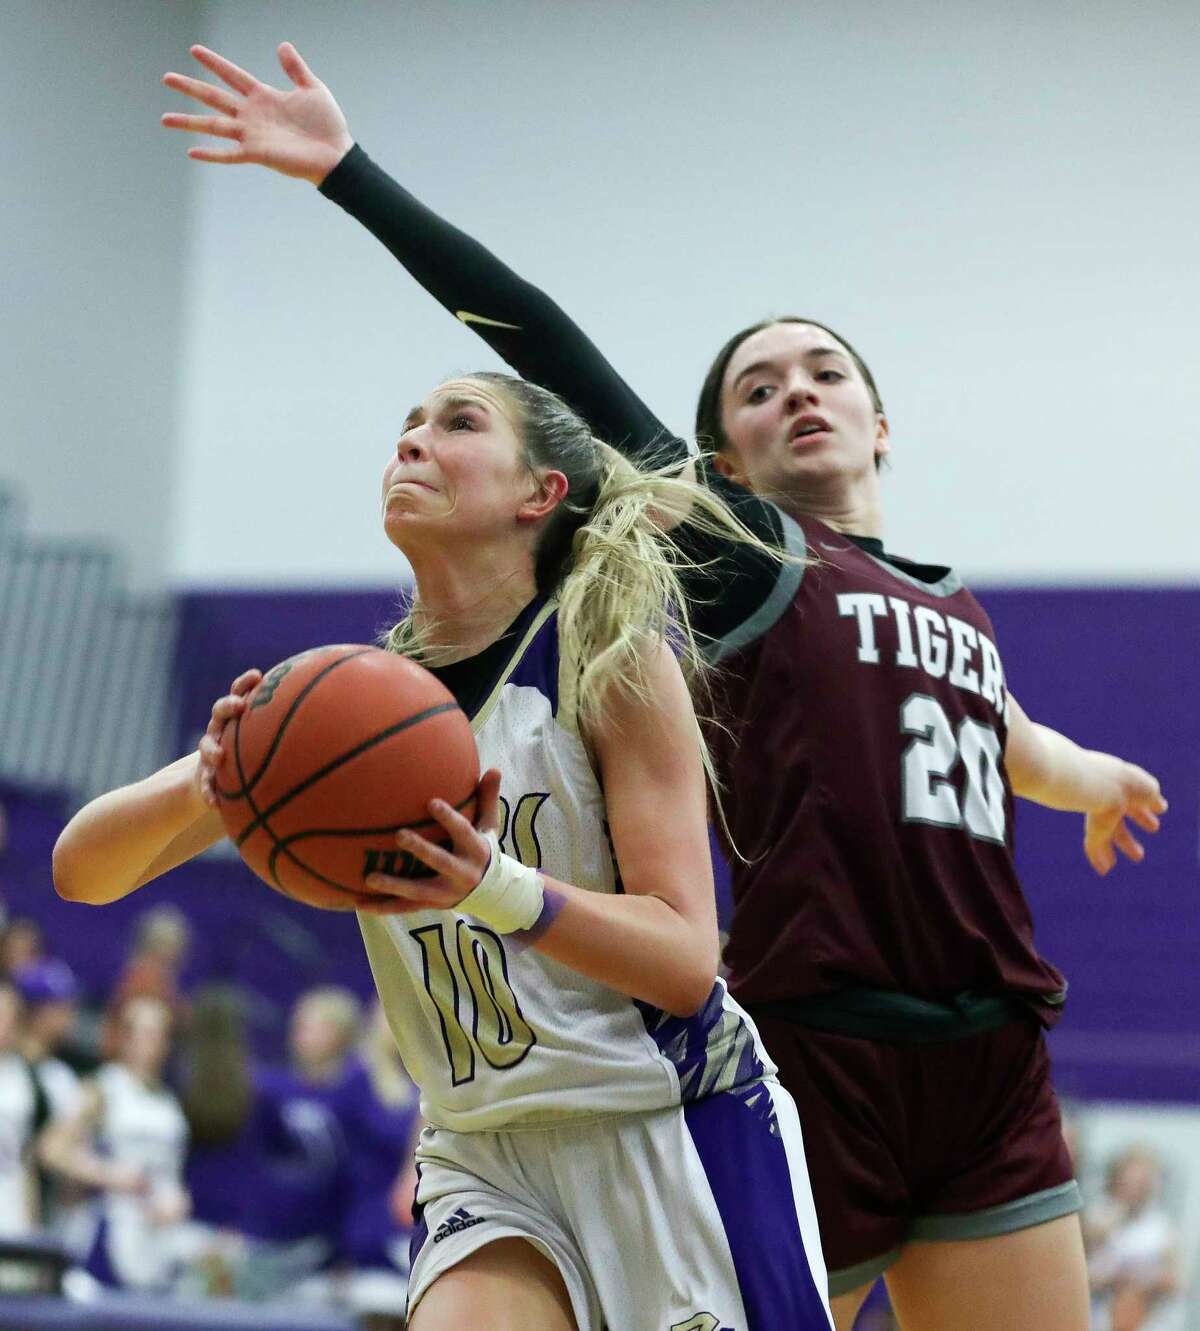 Montgomery's Savannah Piro (10) shoots under A&M Consolidated's Mia Teran (20) during the second quarter of a District 21-5A high school basketball game at Montgomery High School, Tuesday, Feb. 7, 2023, in Montgomery.